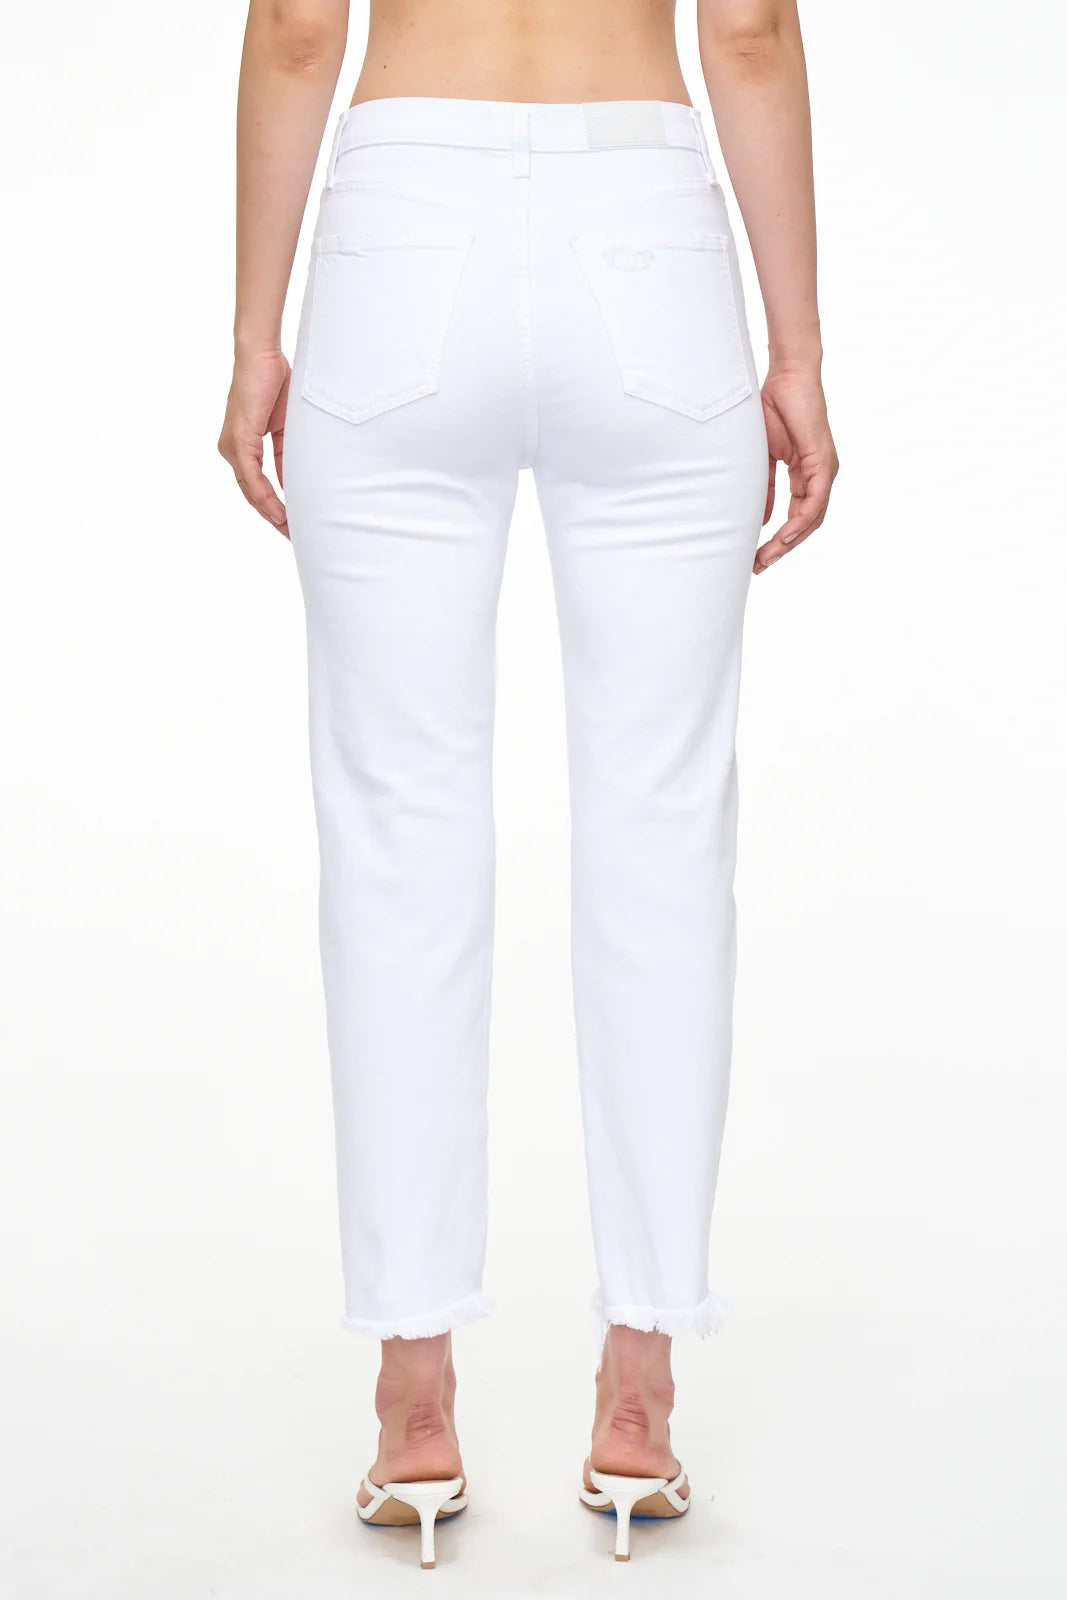 Pistola Charlie High Rise Jeans in White Vintage